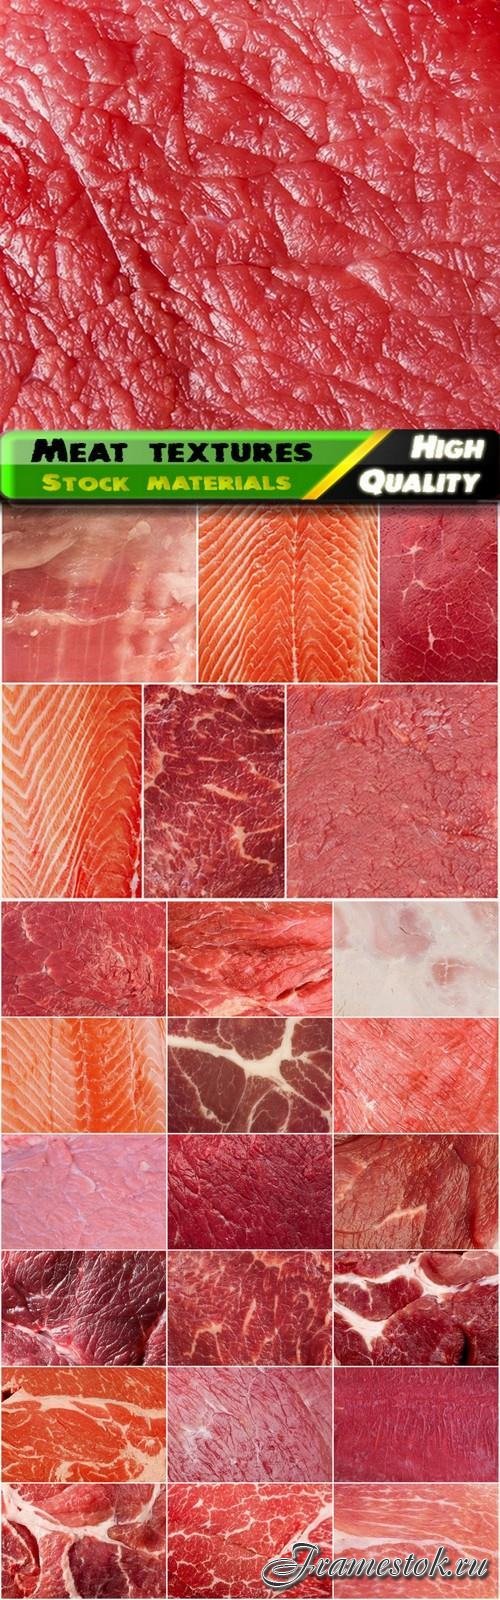 Textures of chicken pork beef and fish meat - 25 HQ Jpg